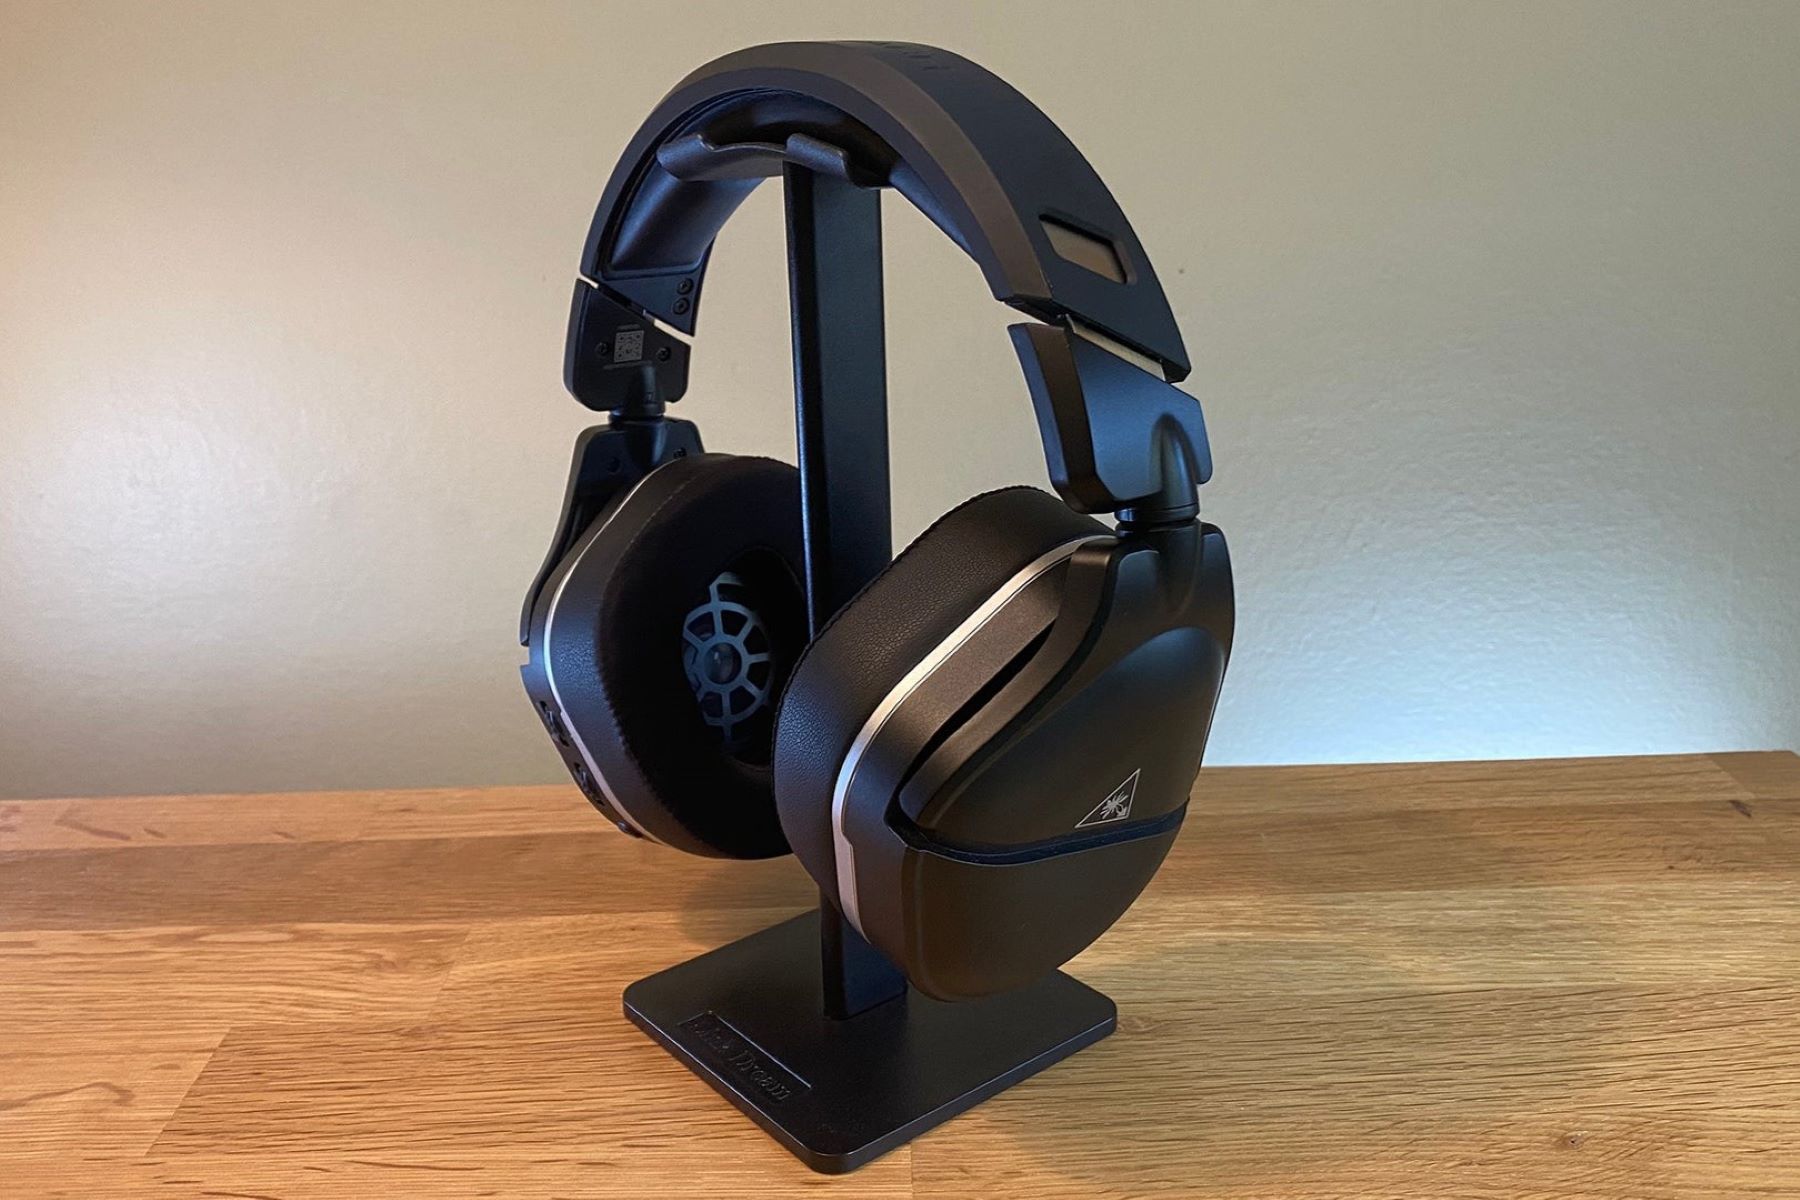 Connecting Your Turtle Beach Headset To A Phone